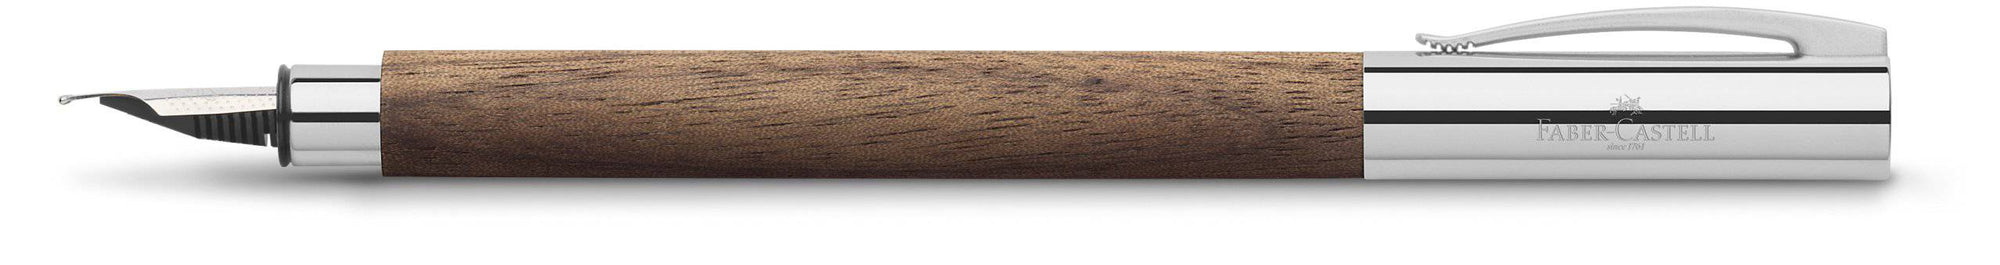 Faber-castell Ambition Walnut Wood Fountain Pen- Blesket Canada